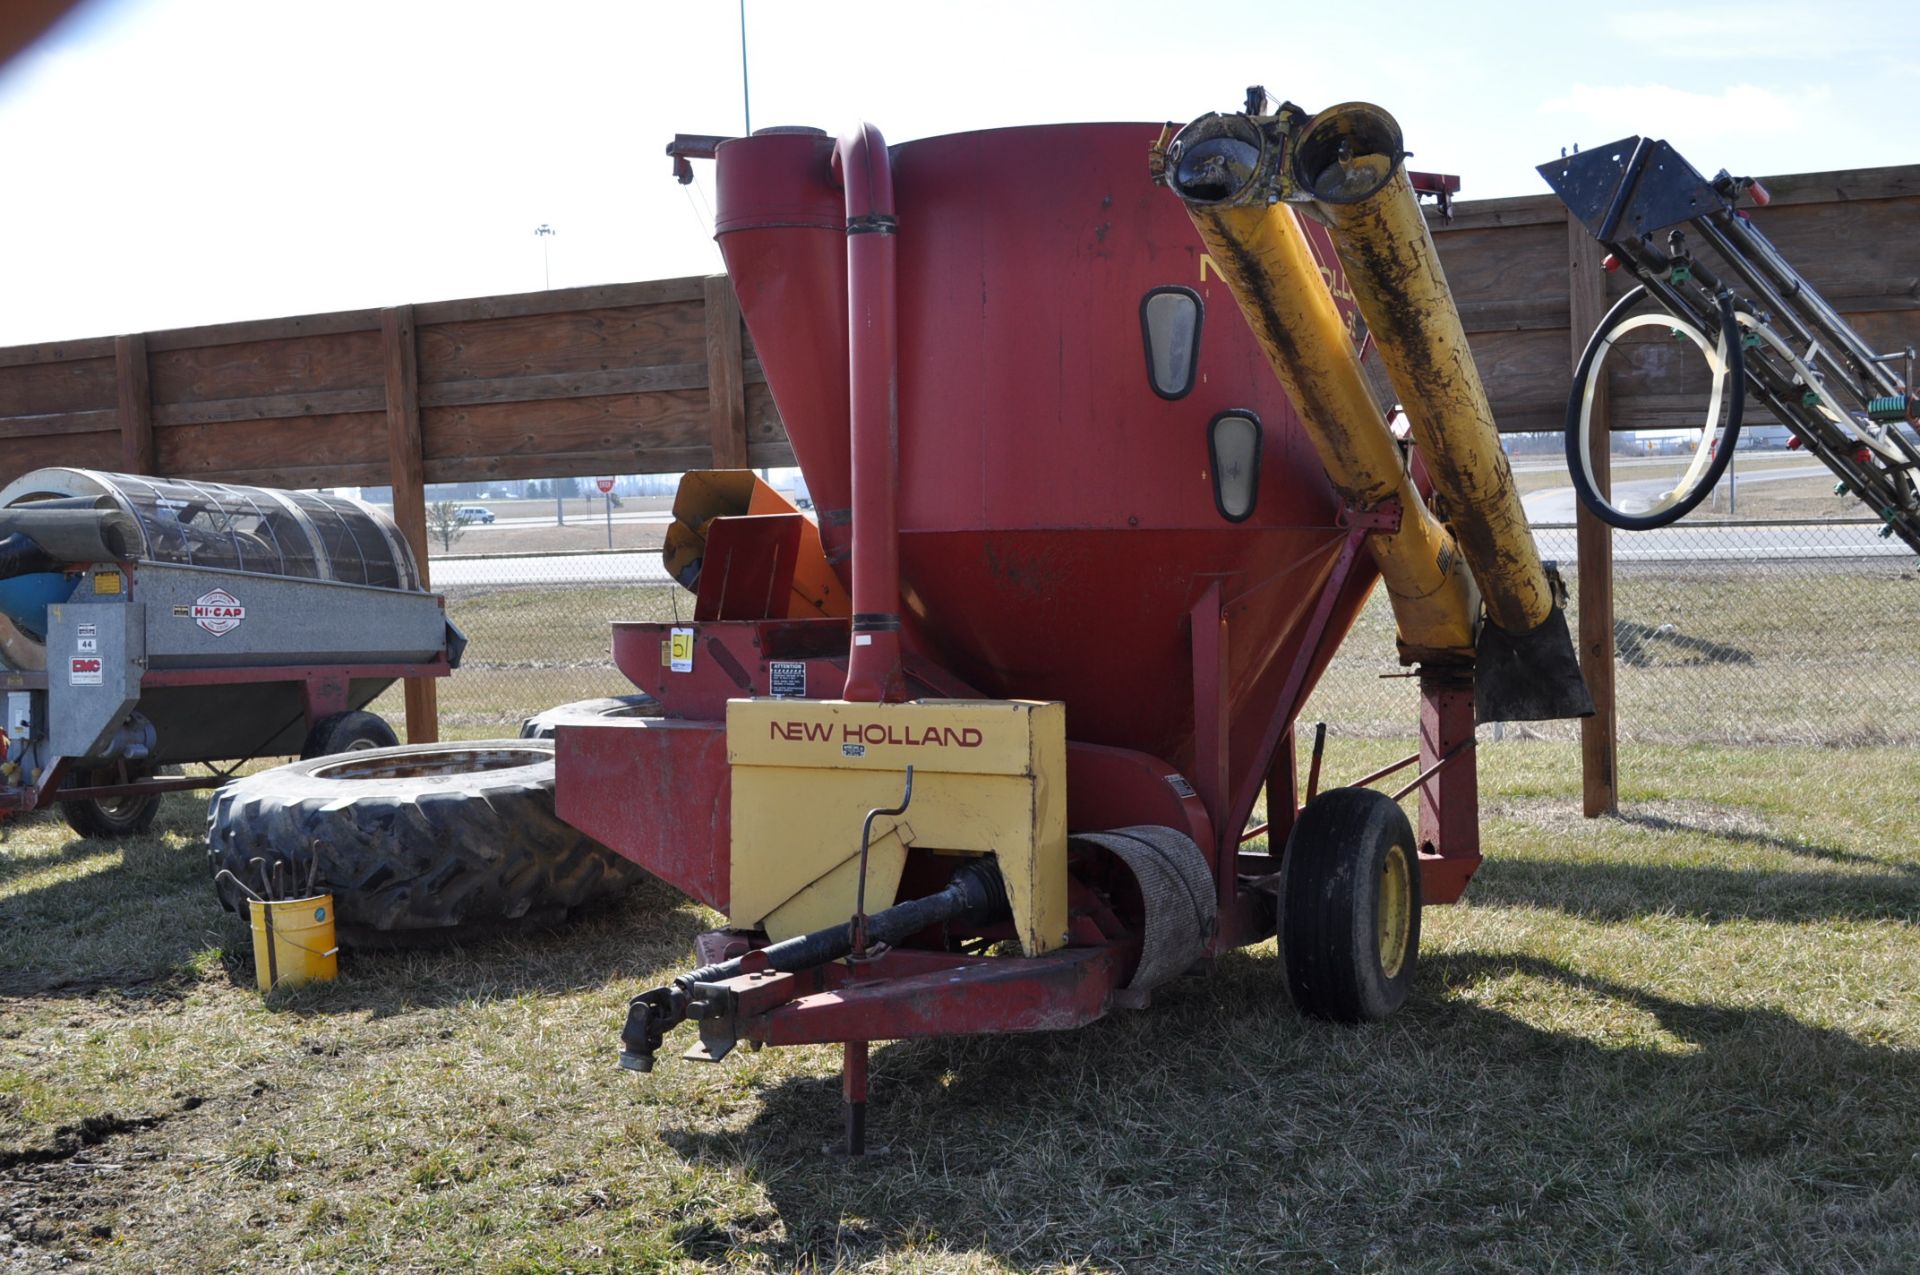 New Holland 355 grinder mixer, load auger, long unload auger, scales need repaired